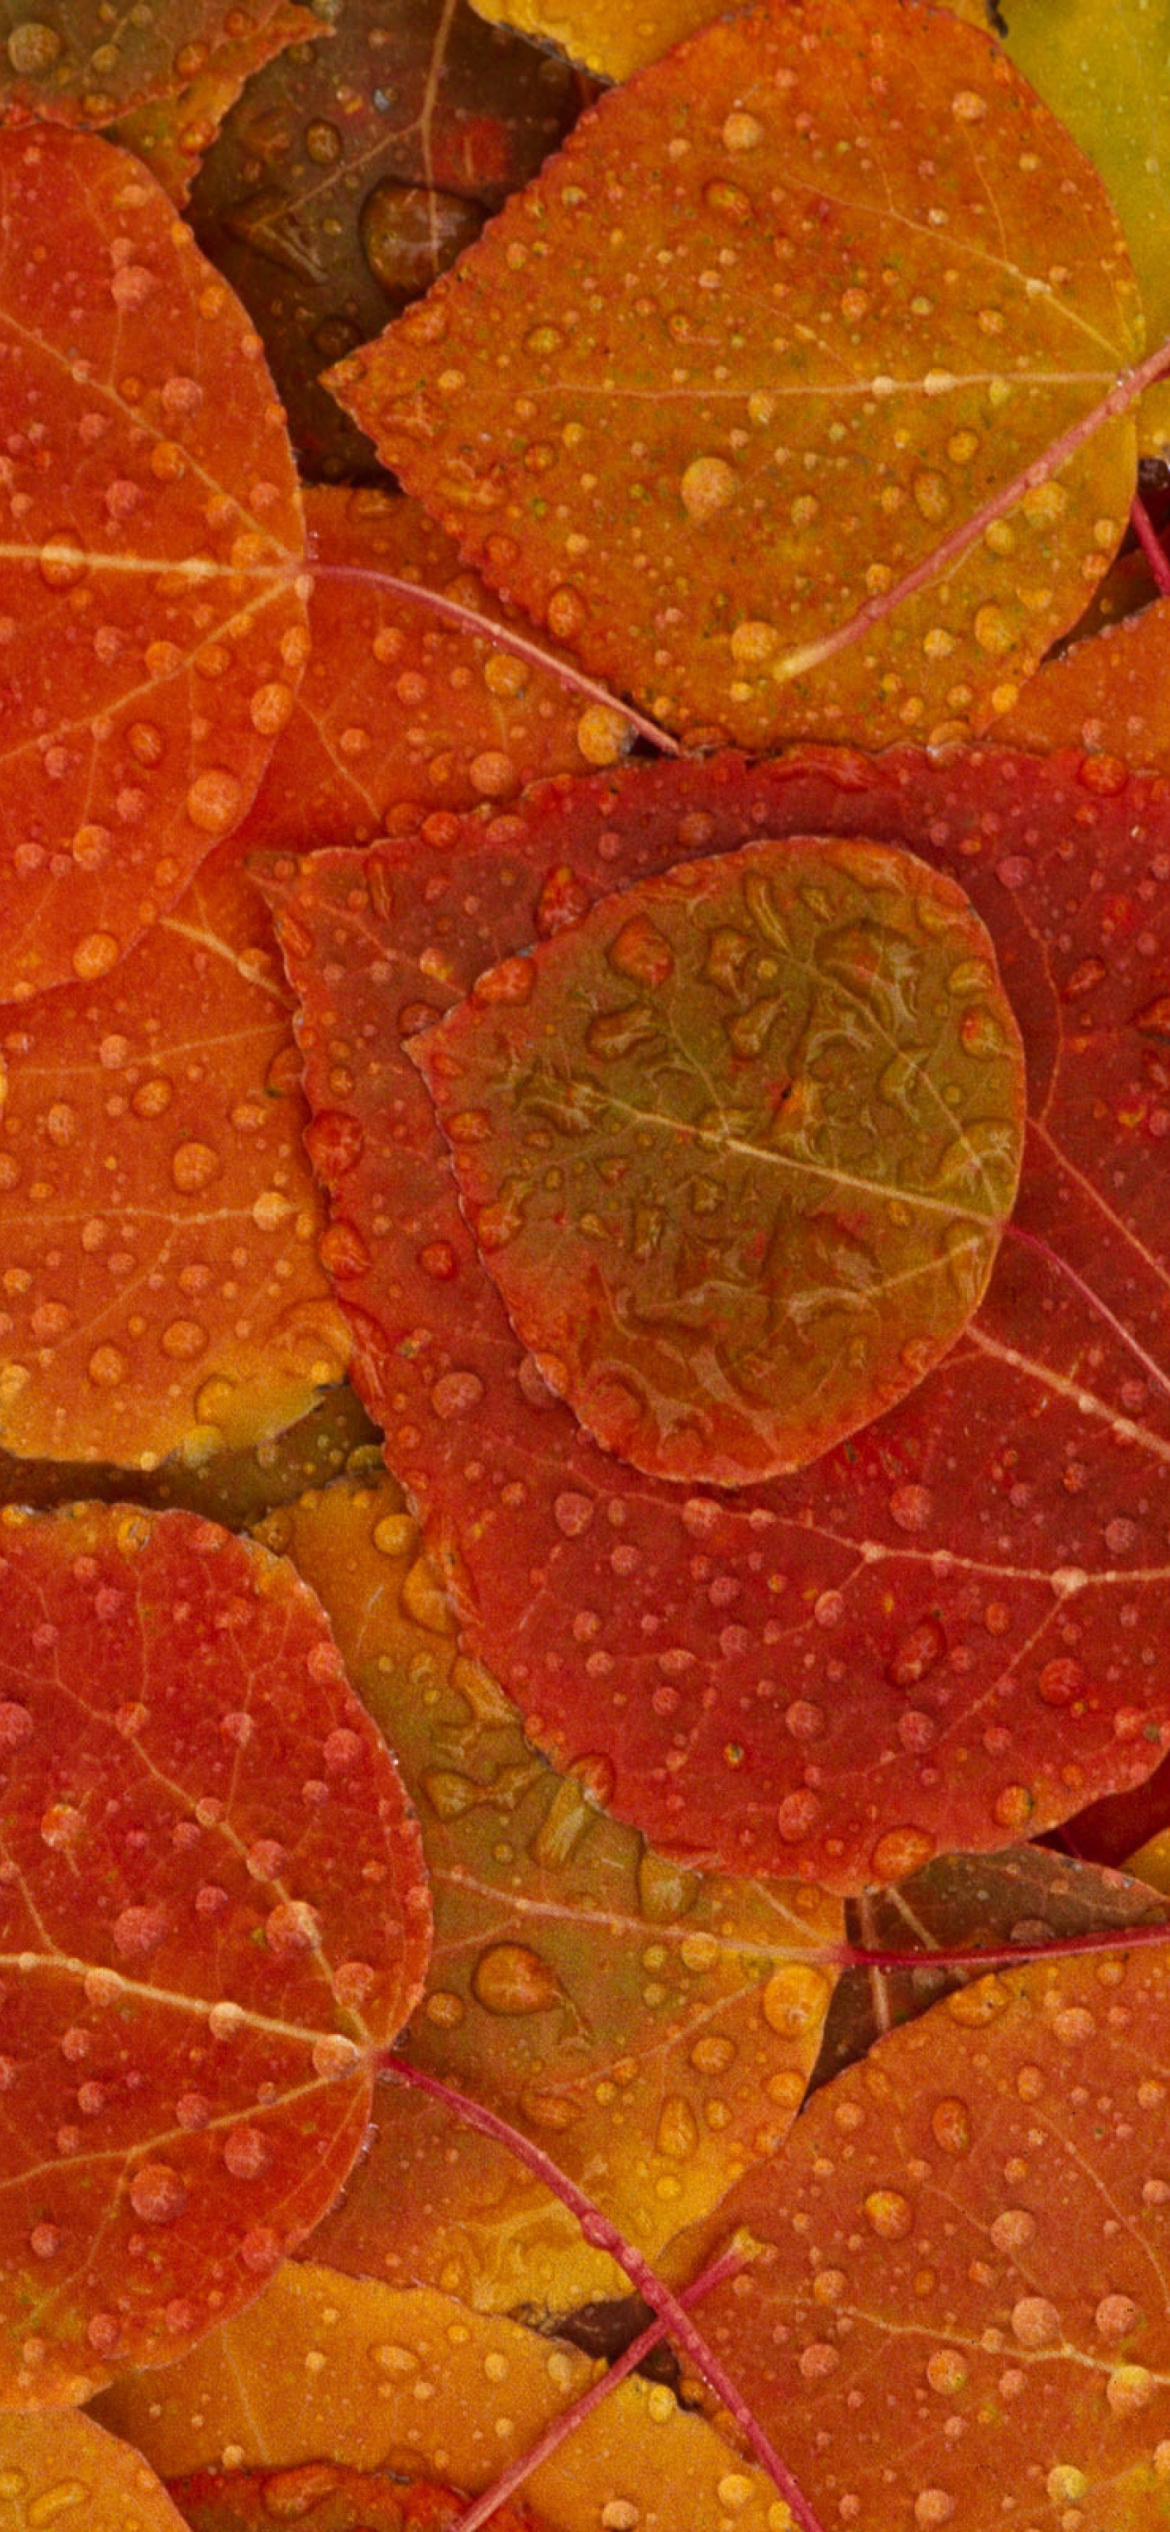 Autumn leaves with rain drops Wallpaper for iPhone 12 Pro